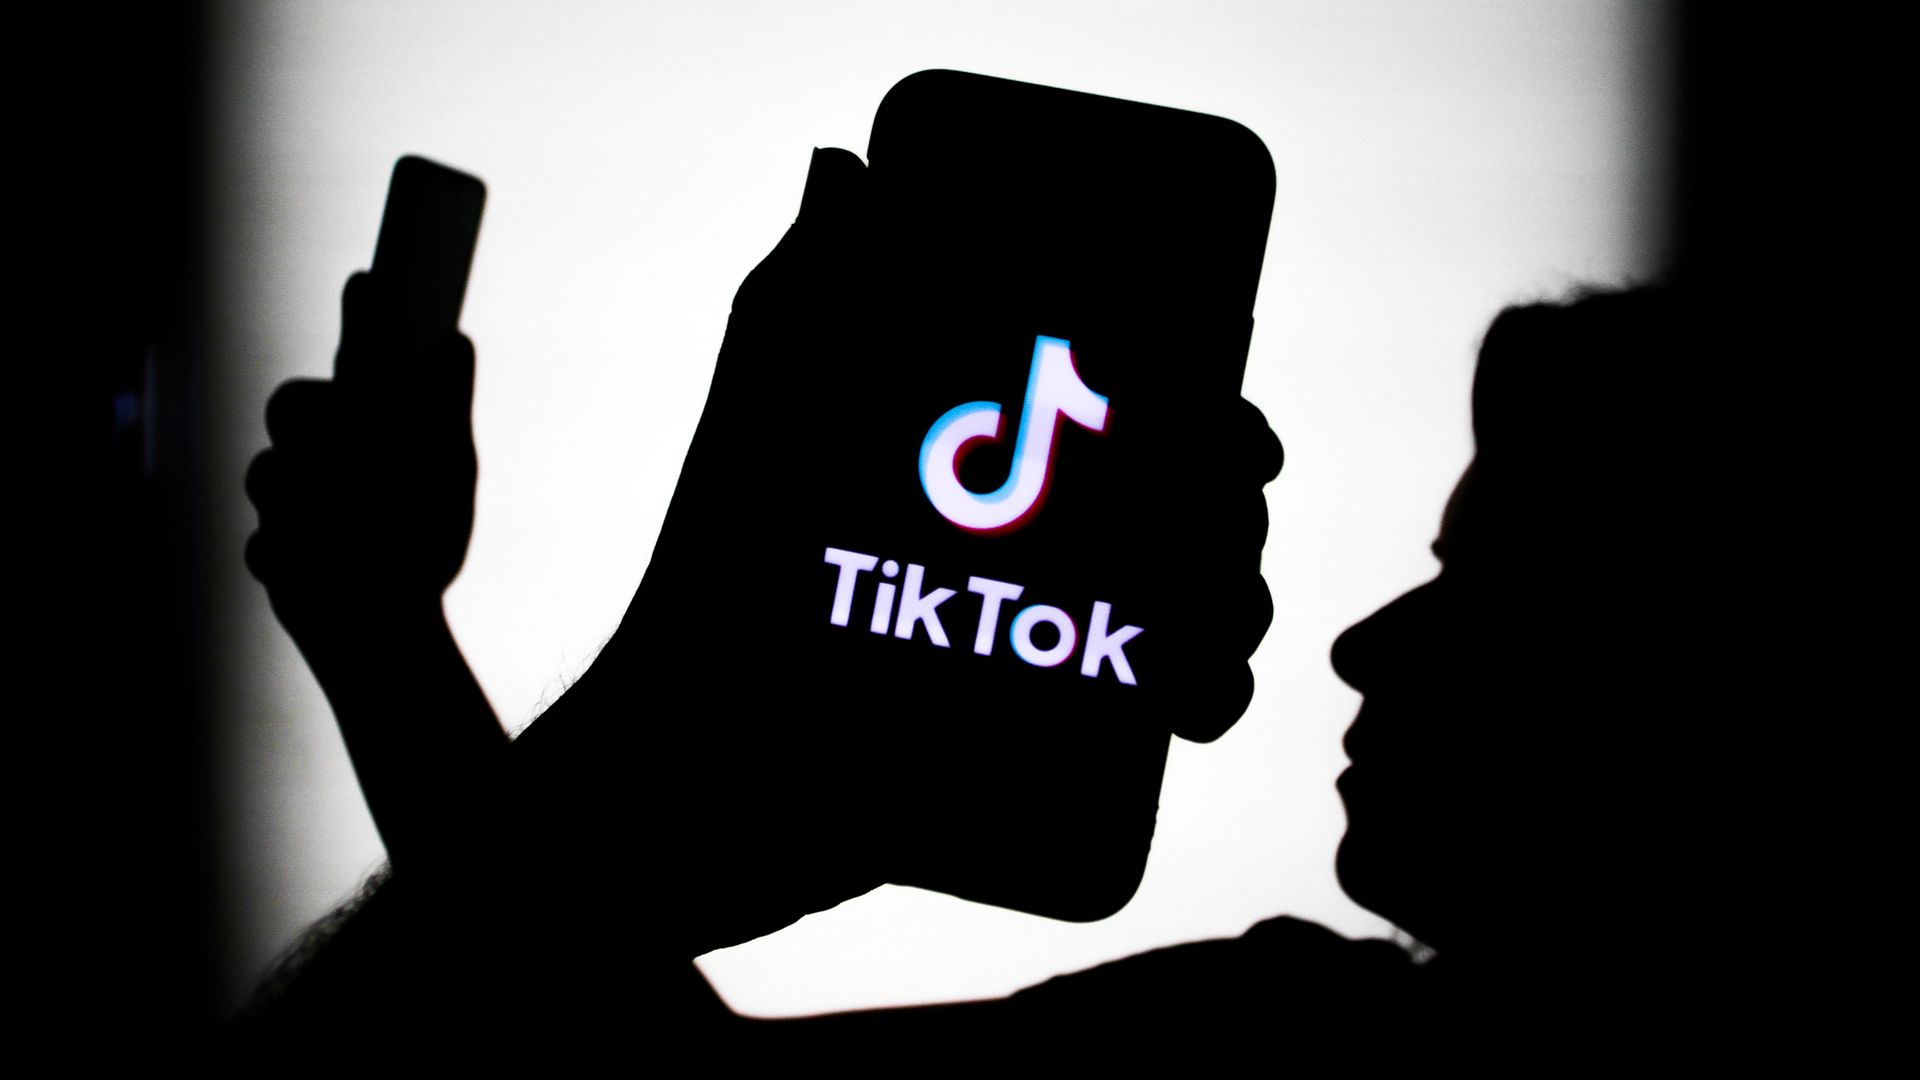 TikTok logo displayed on a phone screen is seen in this illustration photo taken in Krakow, Poland on July 18, 2021